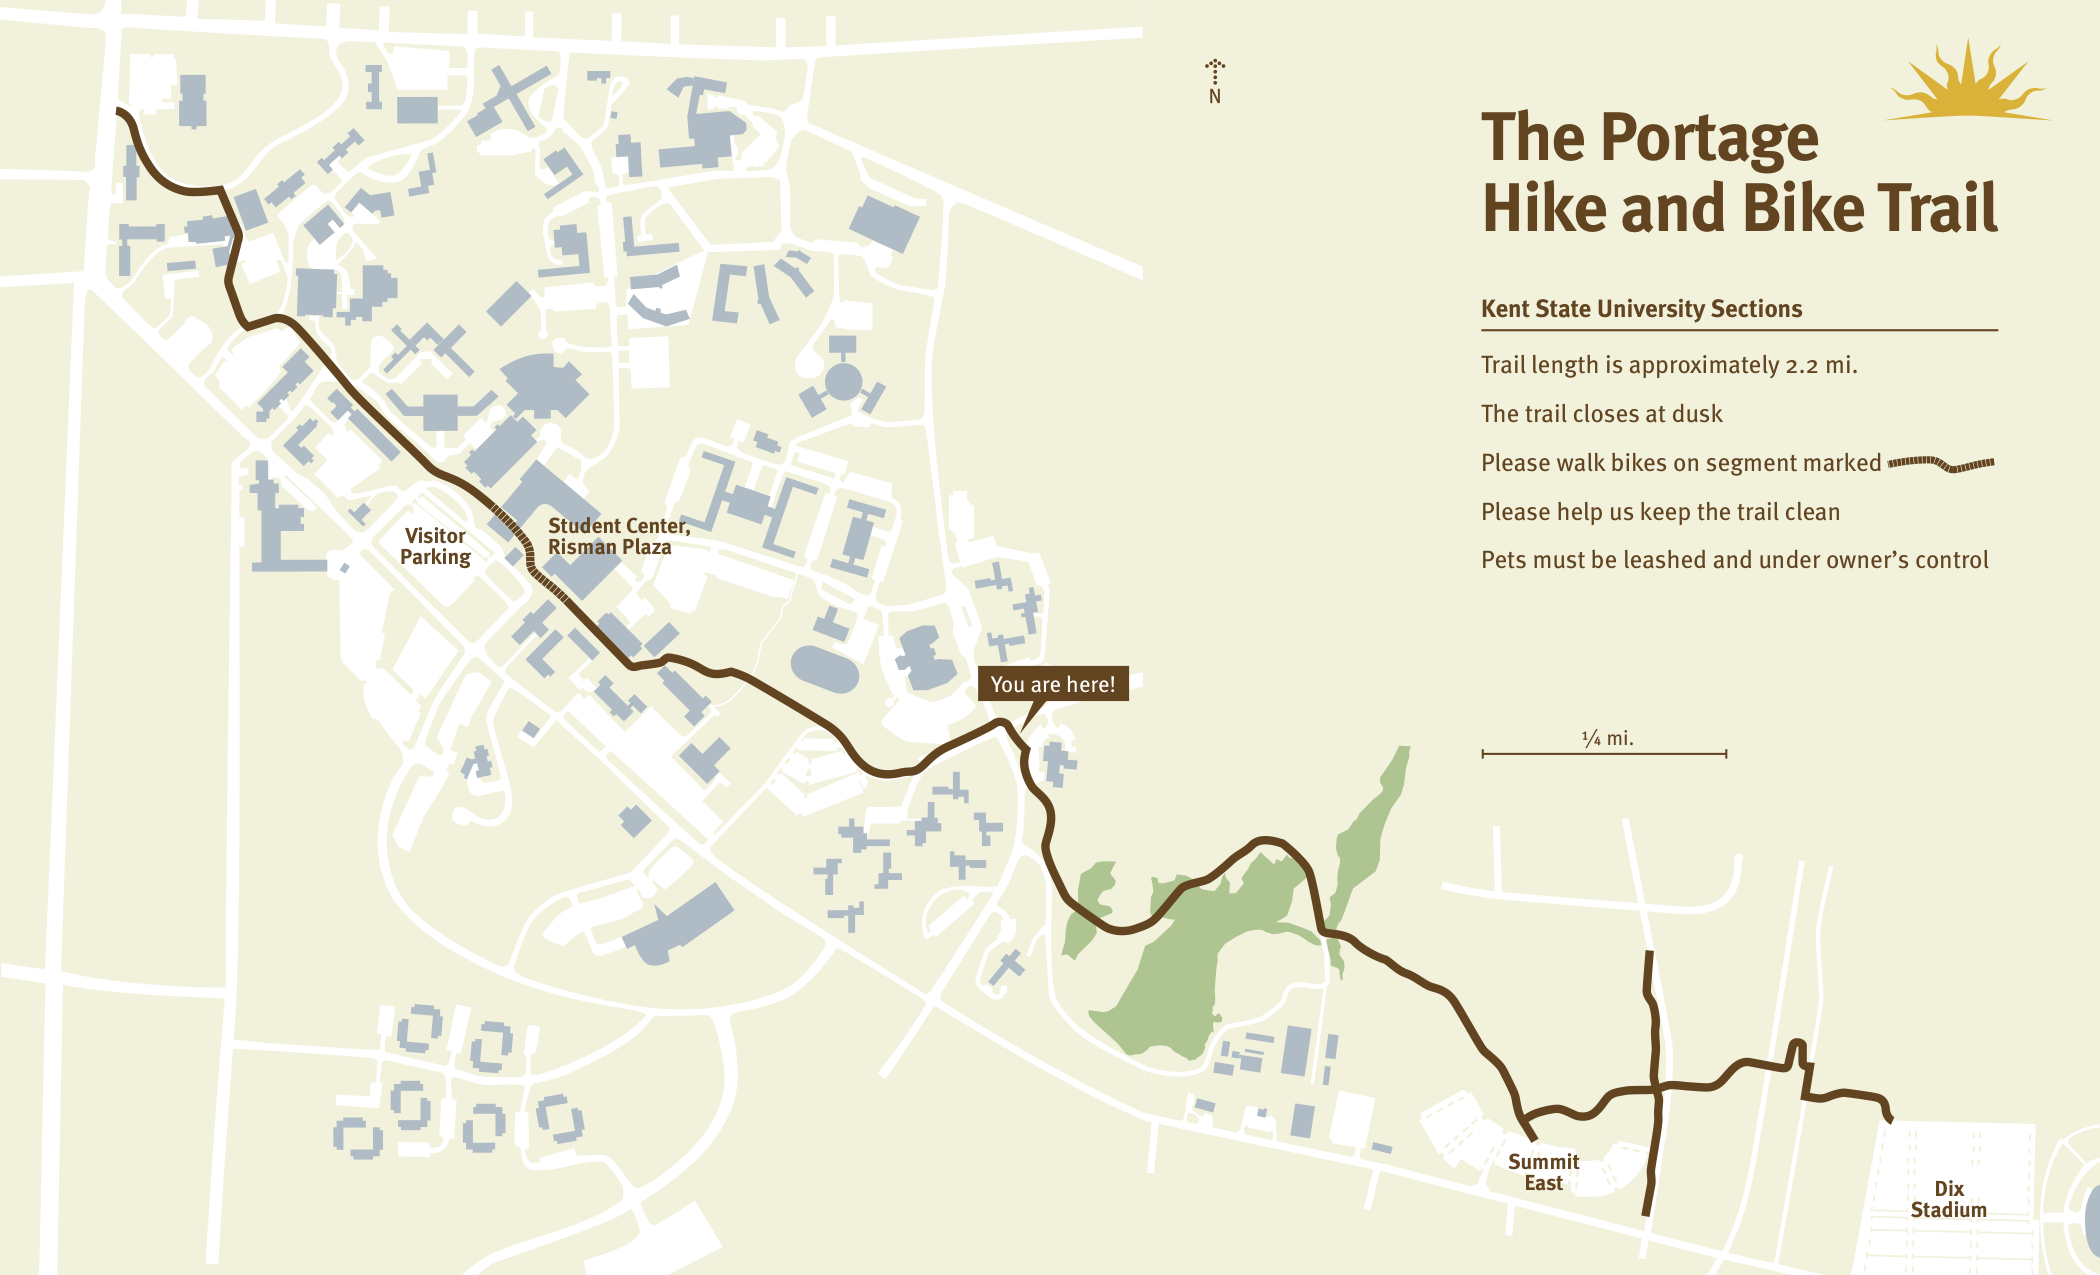 Map of the Portage hike and bike trail’s Kent State campus section